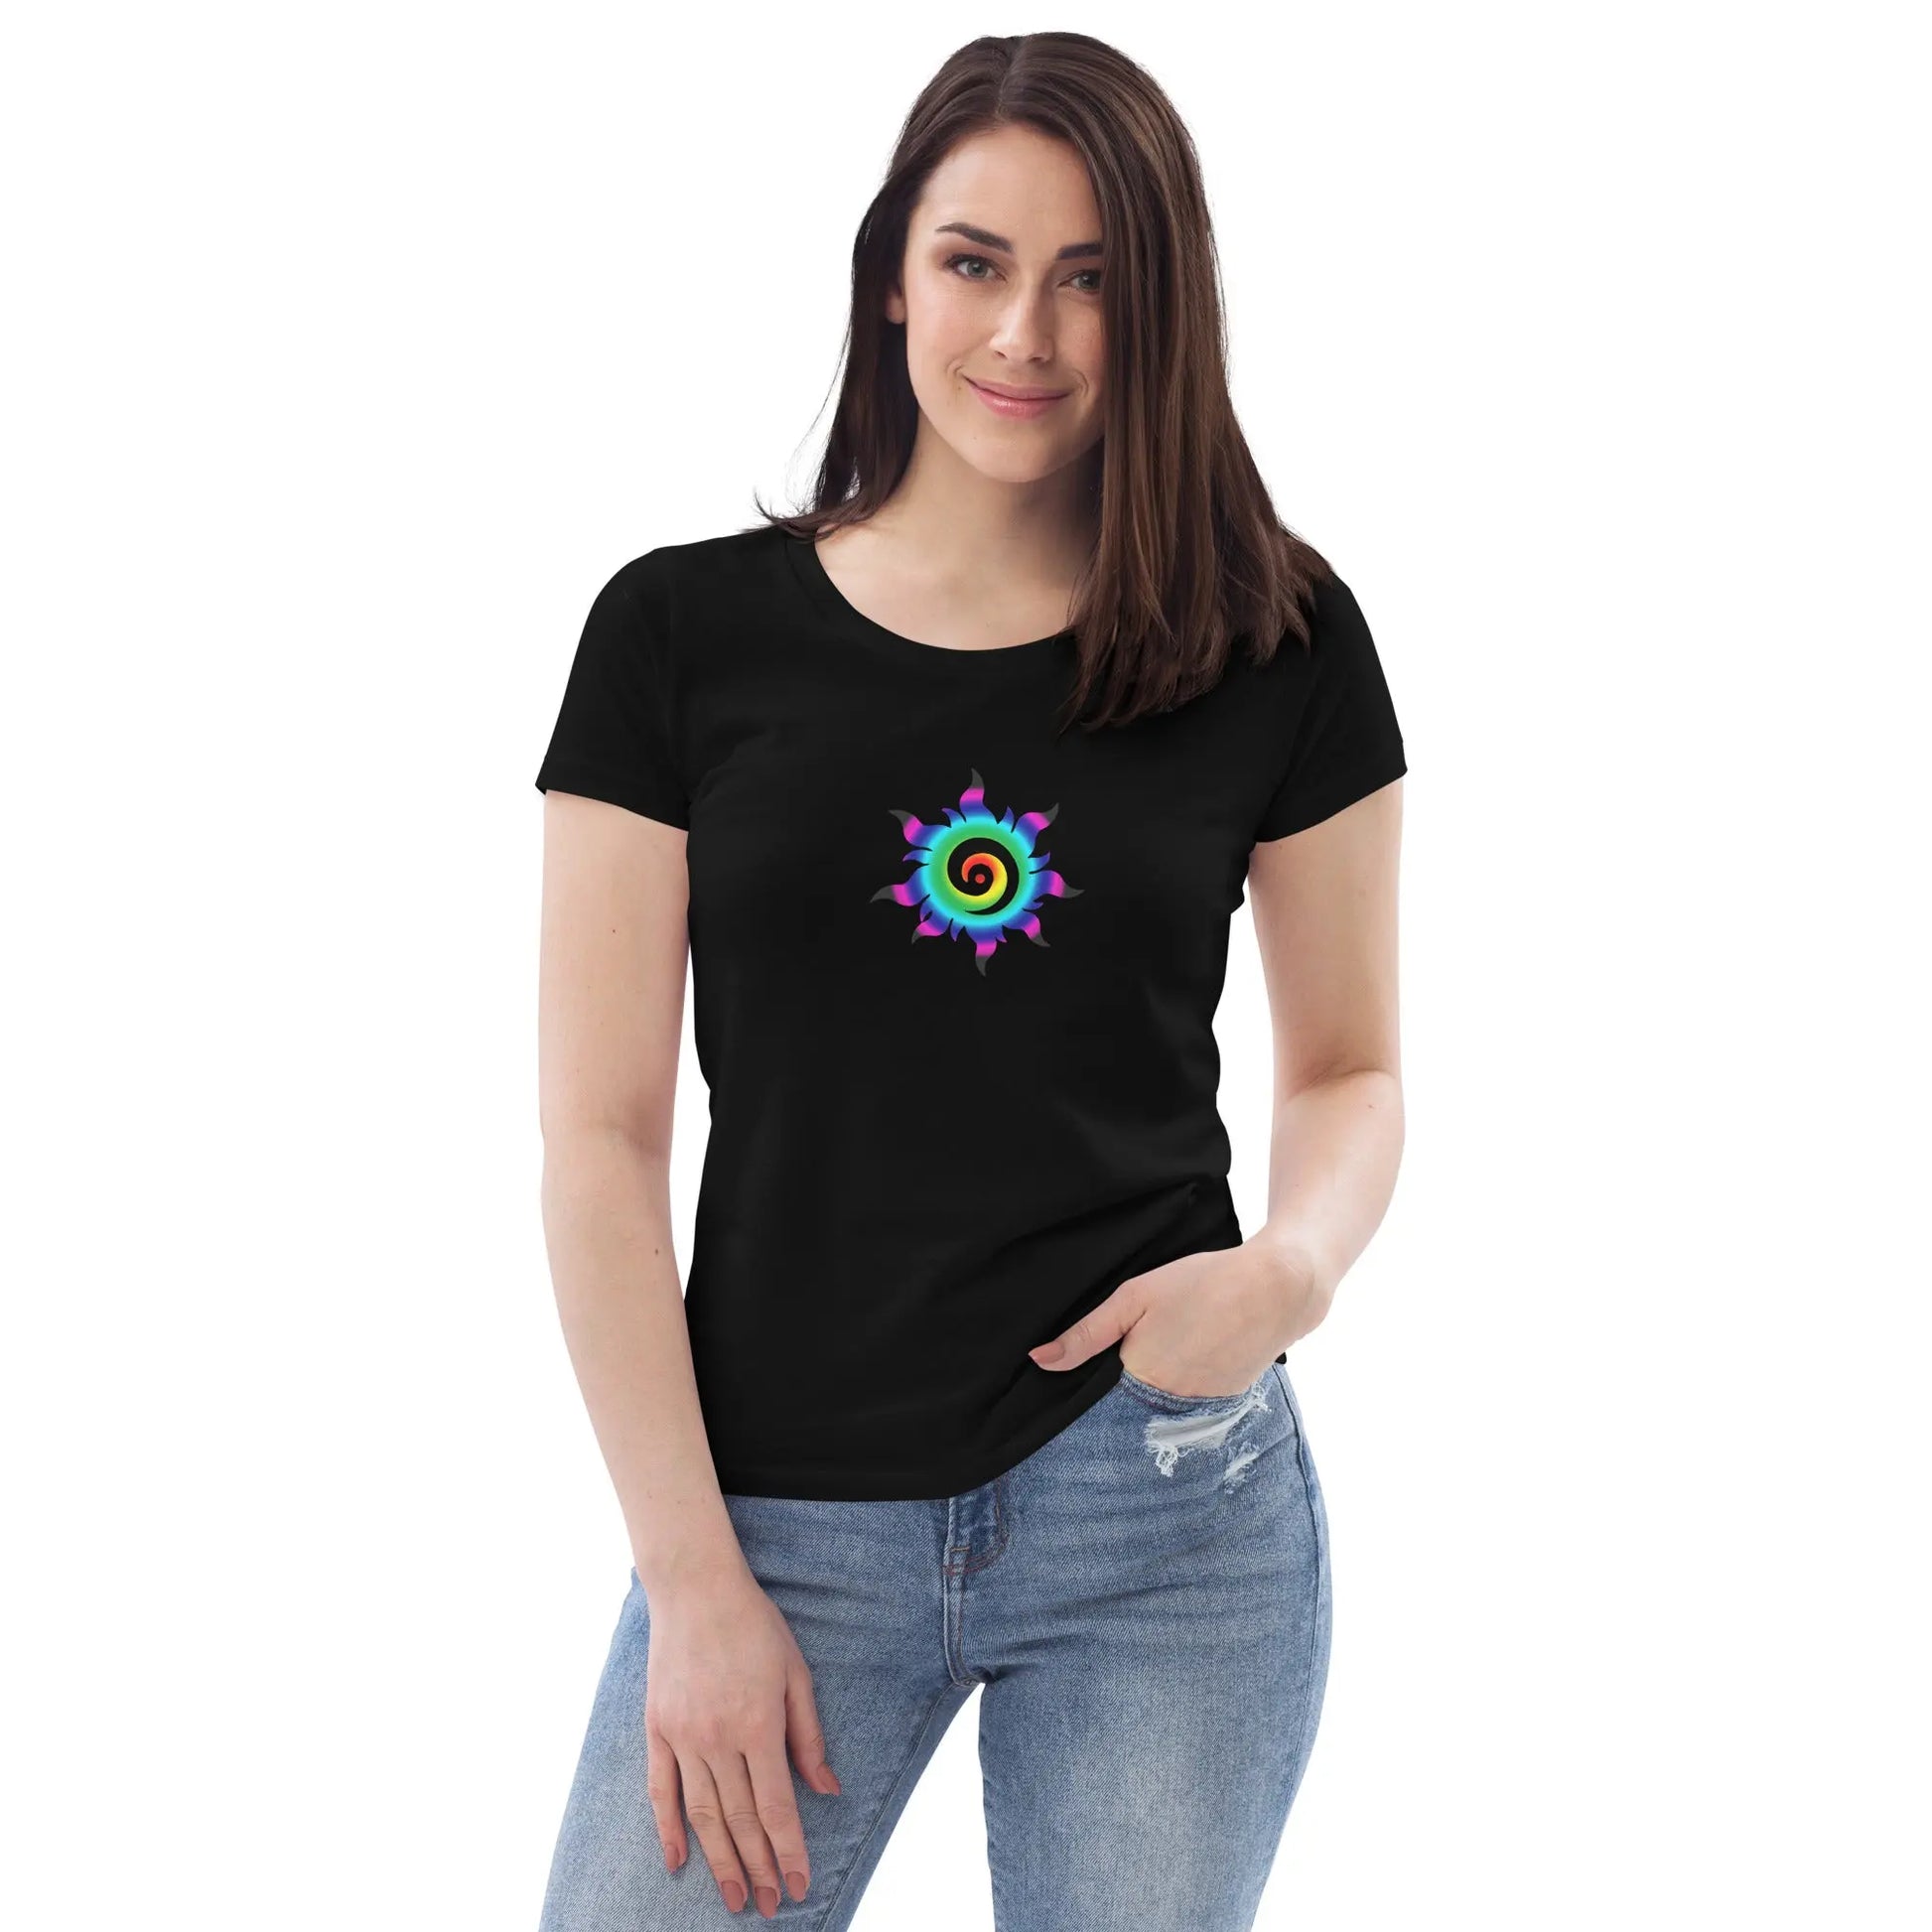 Women's fitted eco tee ActSunx - Image #4